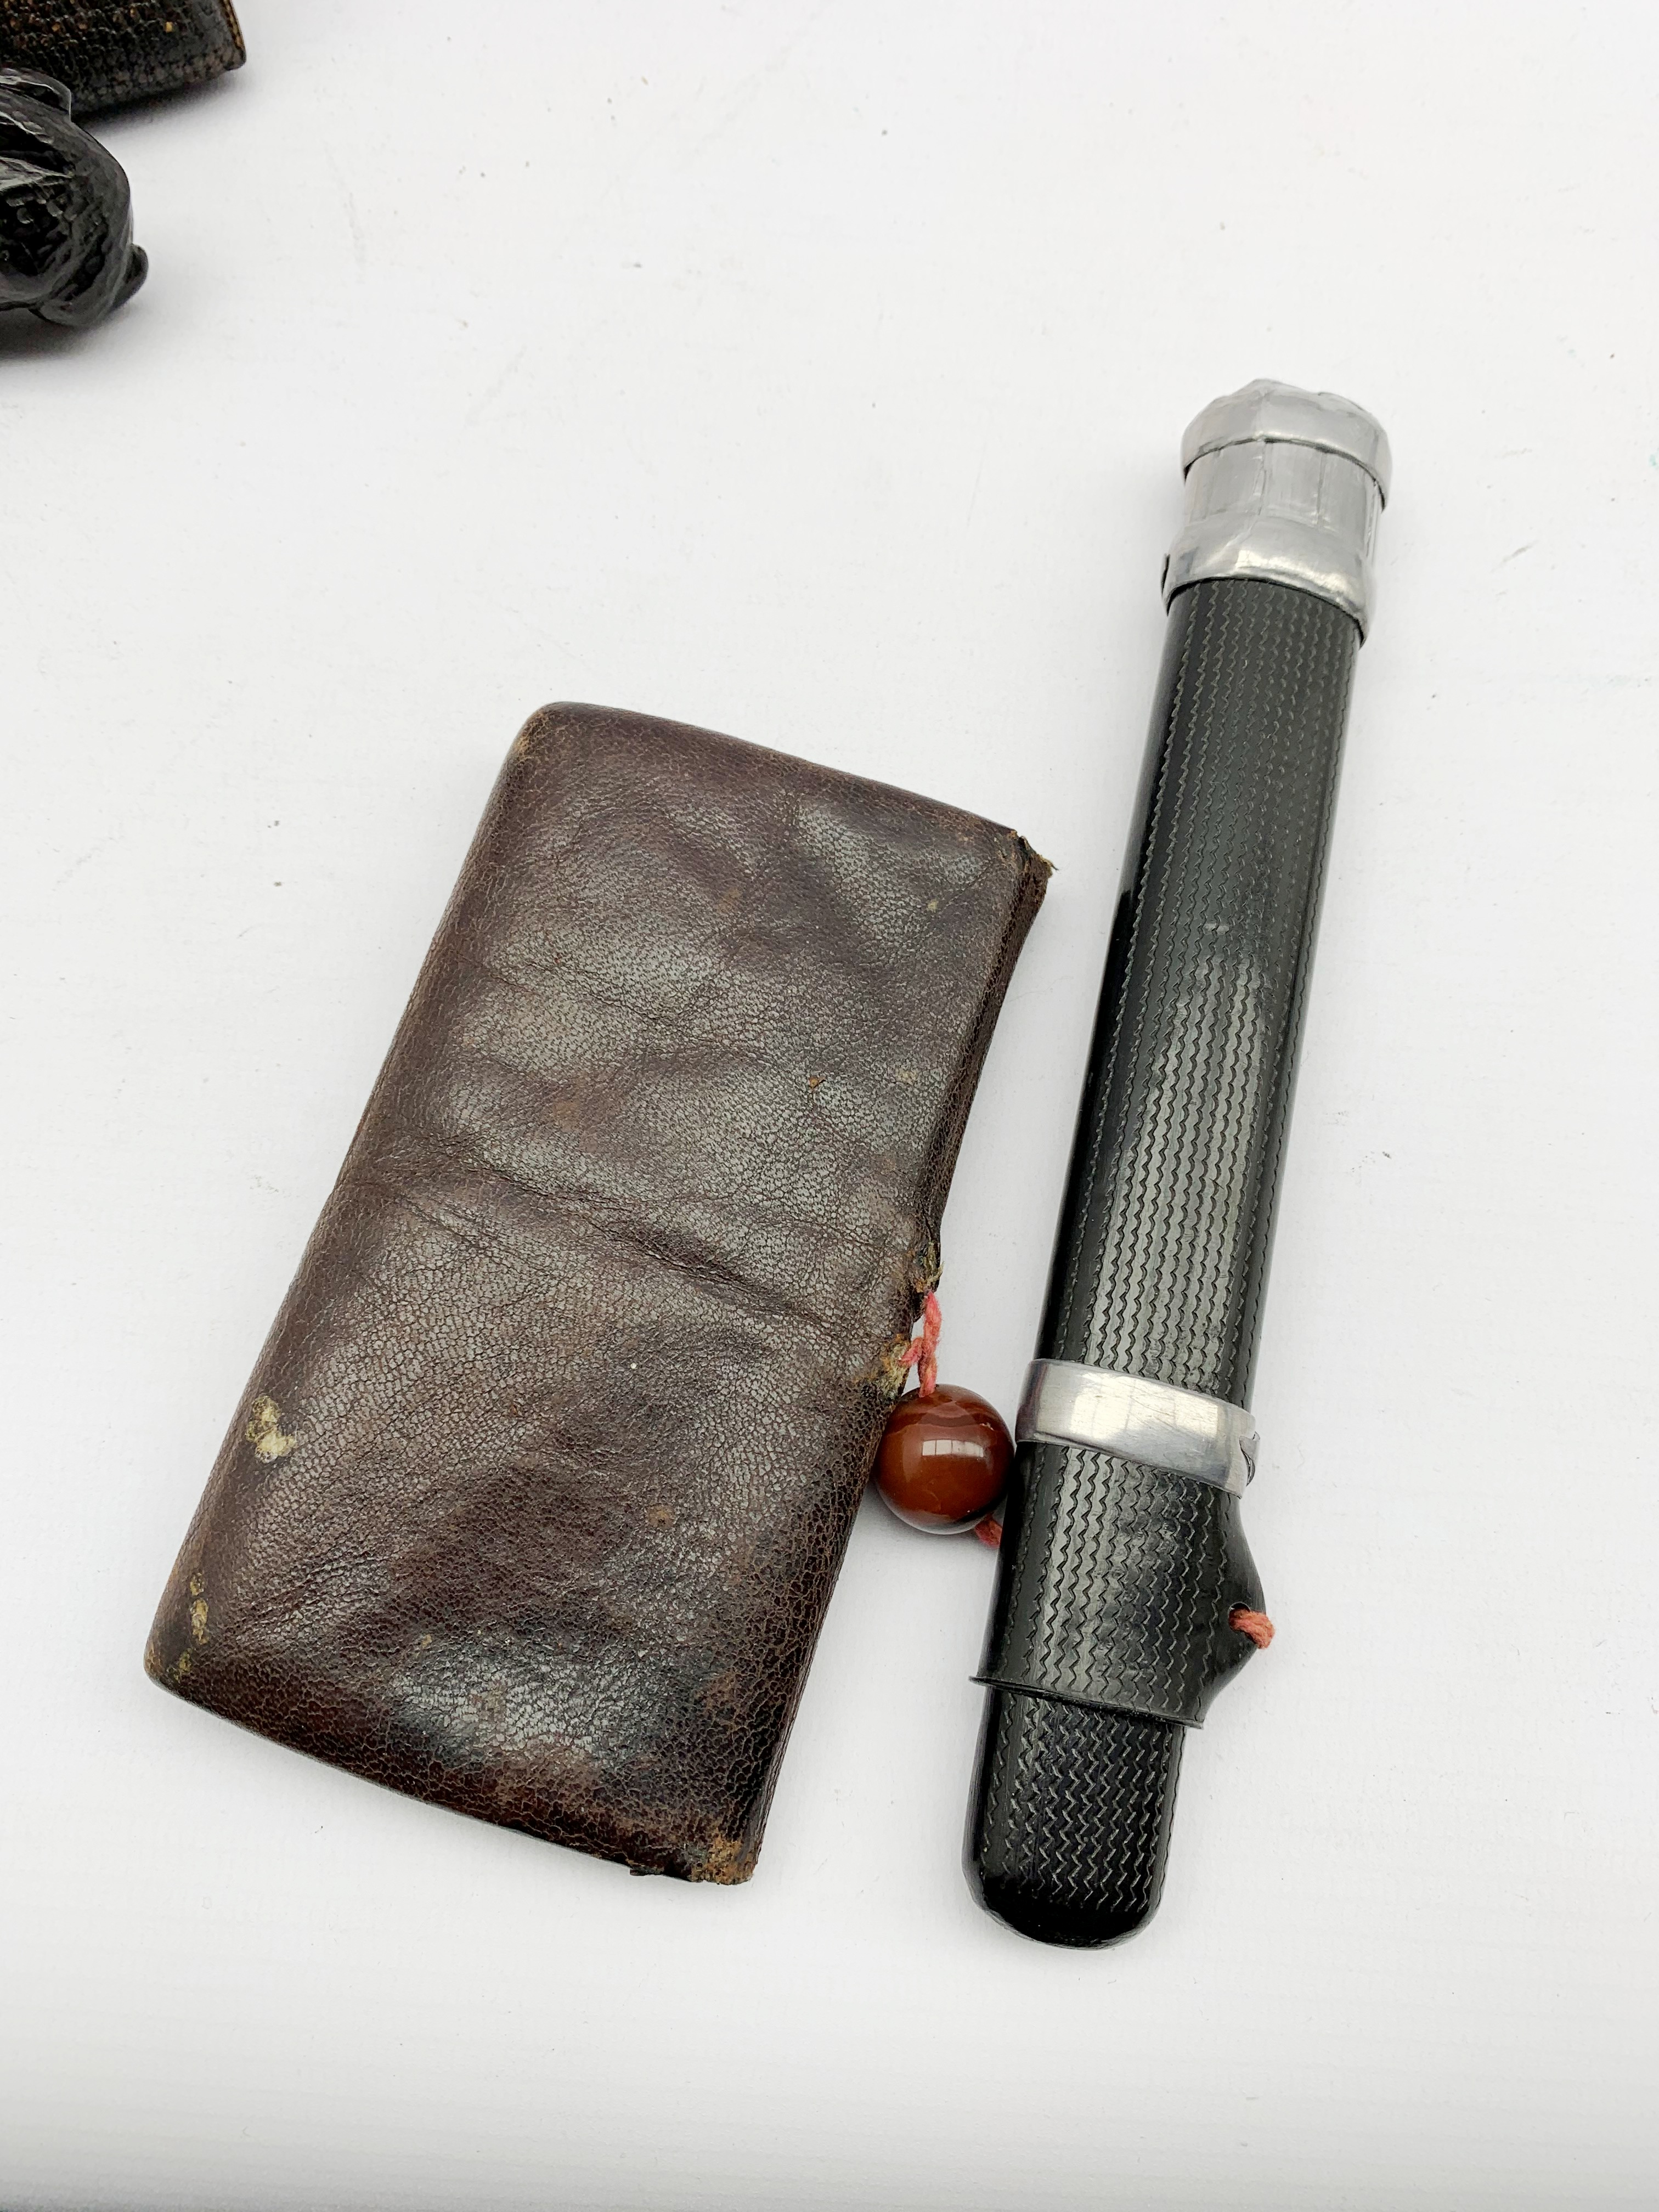 Two Japanese leather tobacco pouches (tabako-ire), one with incised black lacquer pipe case (Kiseruz - Image 4 of 5